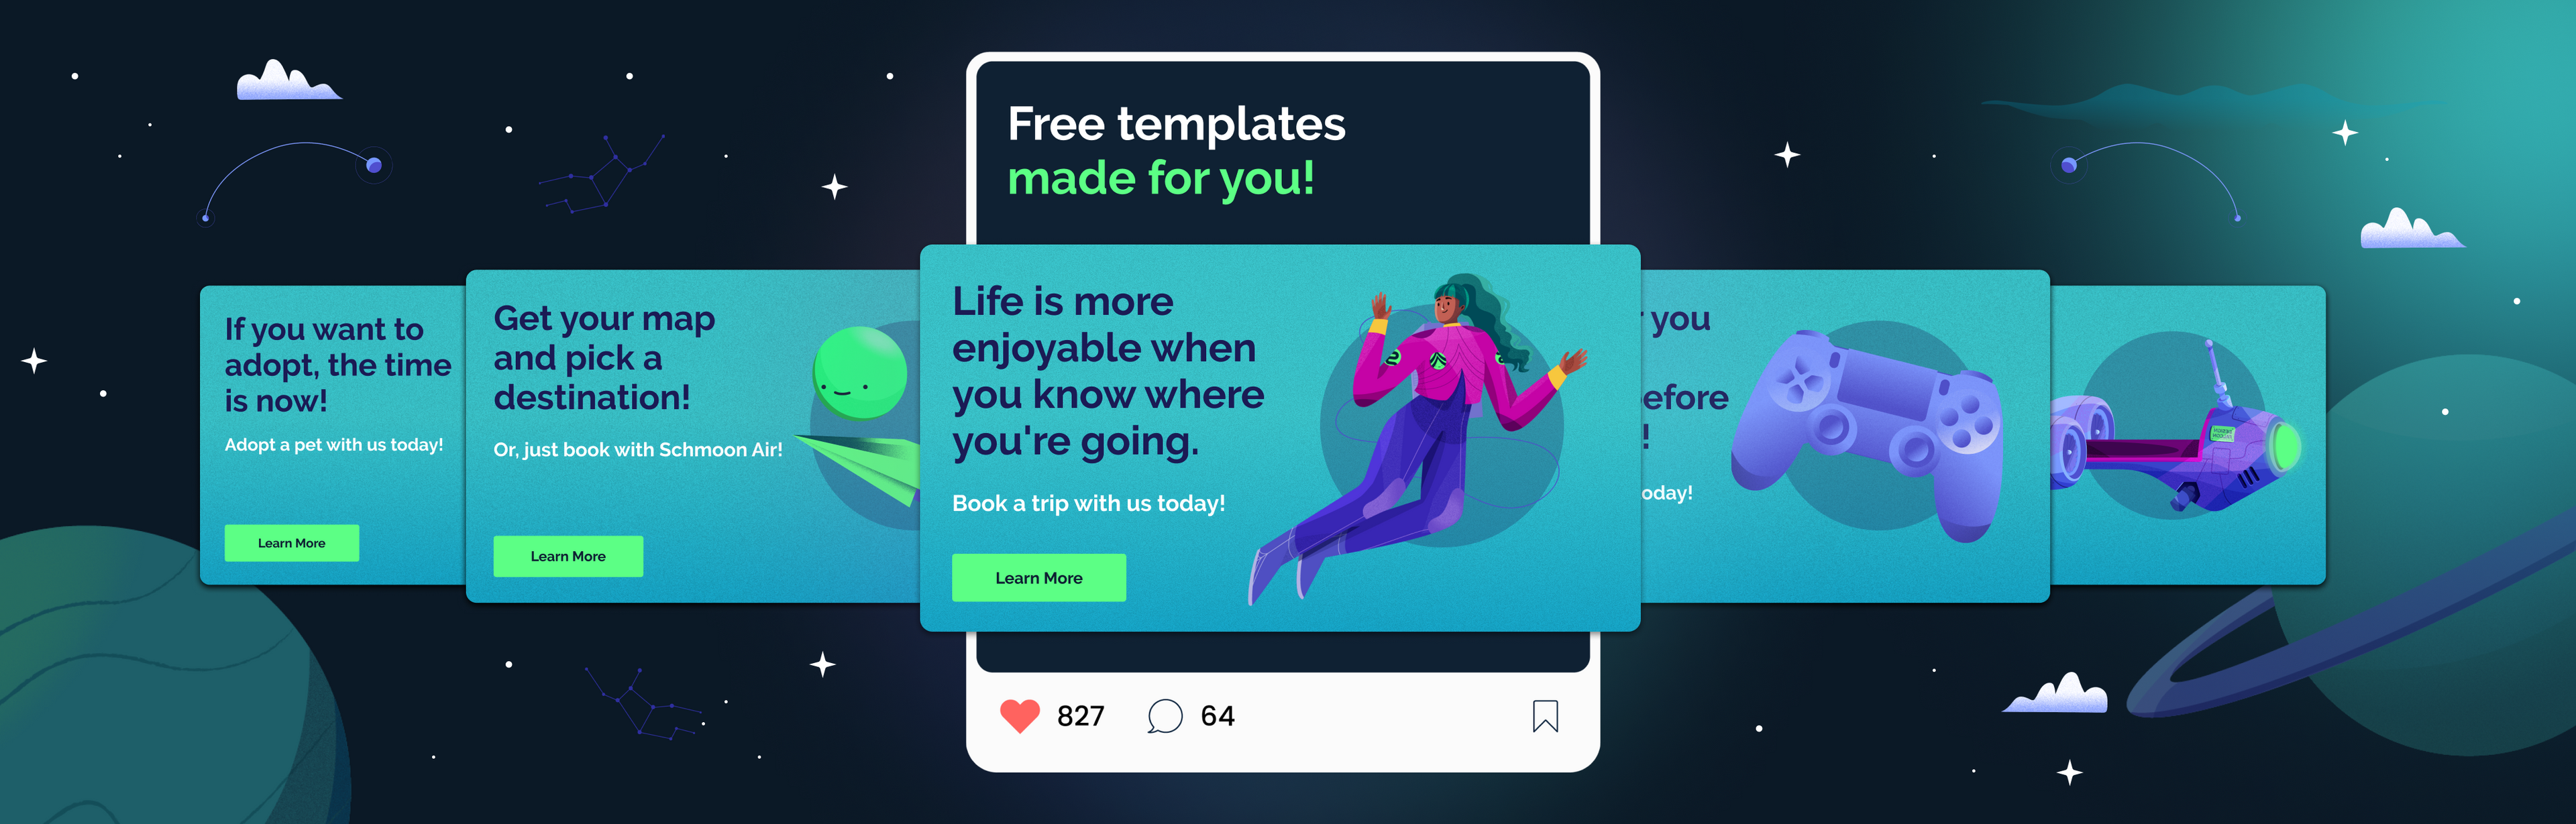 How To Create Your Own Design Using Free Ad Templates - Superside 